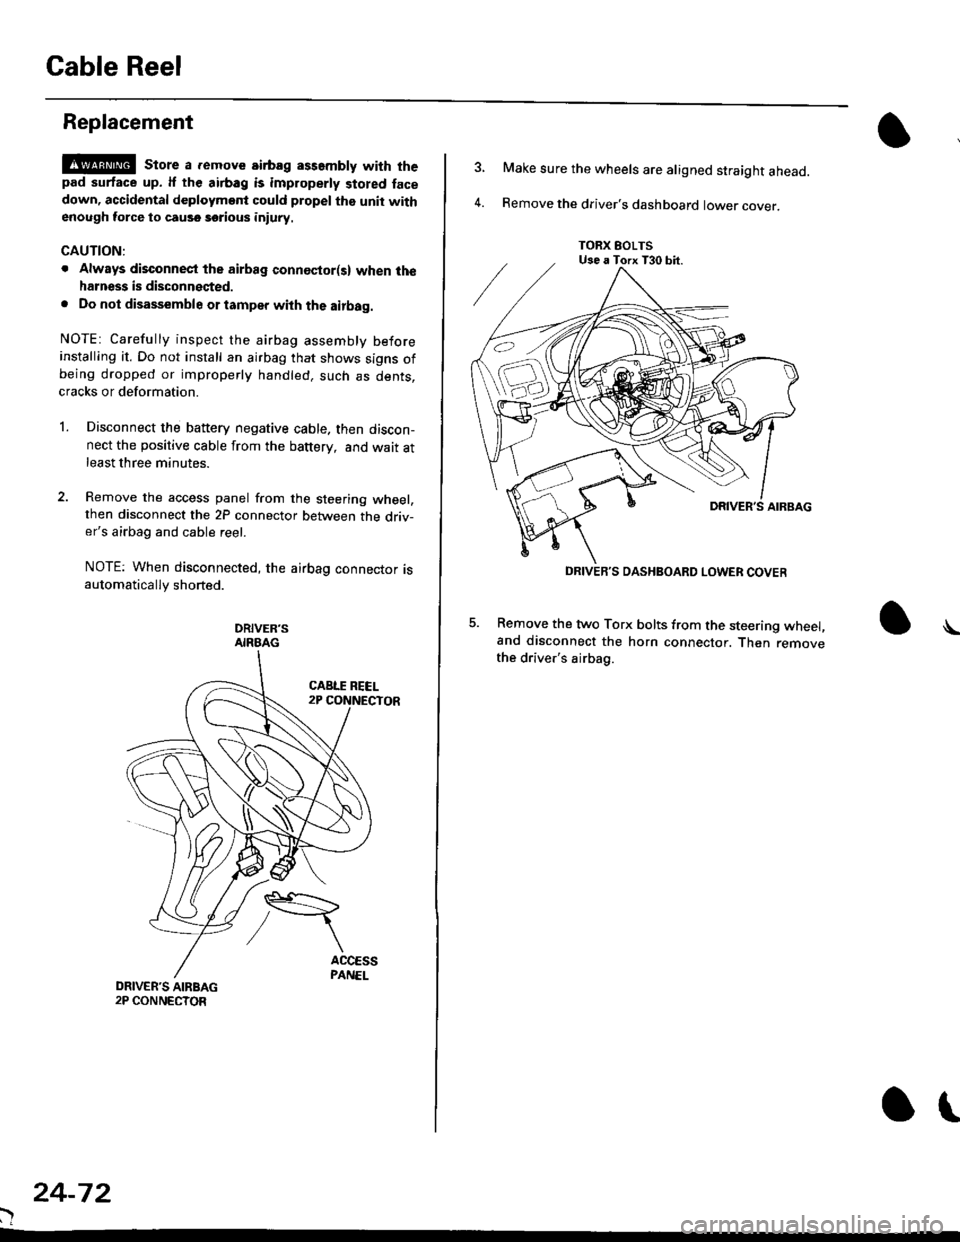 HONDA CIVIC 1997 6.G Service Manual Gable Reel
Replacement
!@@ store a .emove airbag assambly with thepad surtace up. lf the airbag is improperly stored face
down, accidental deploymont could propel the unit withenough force to cause so